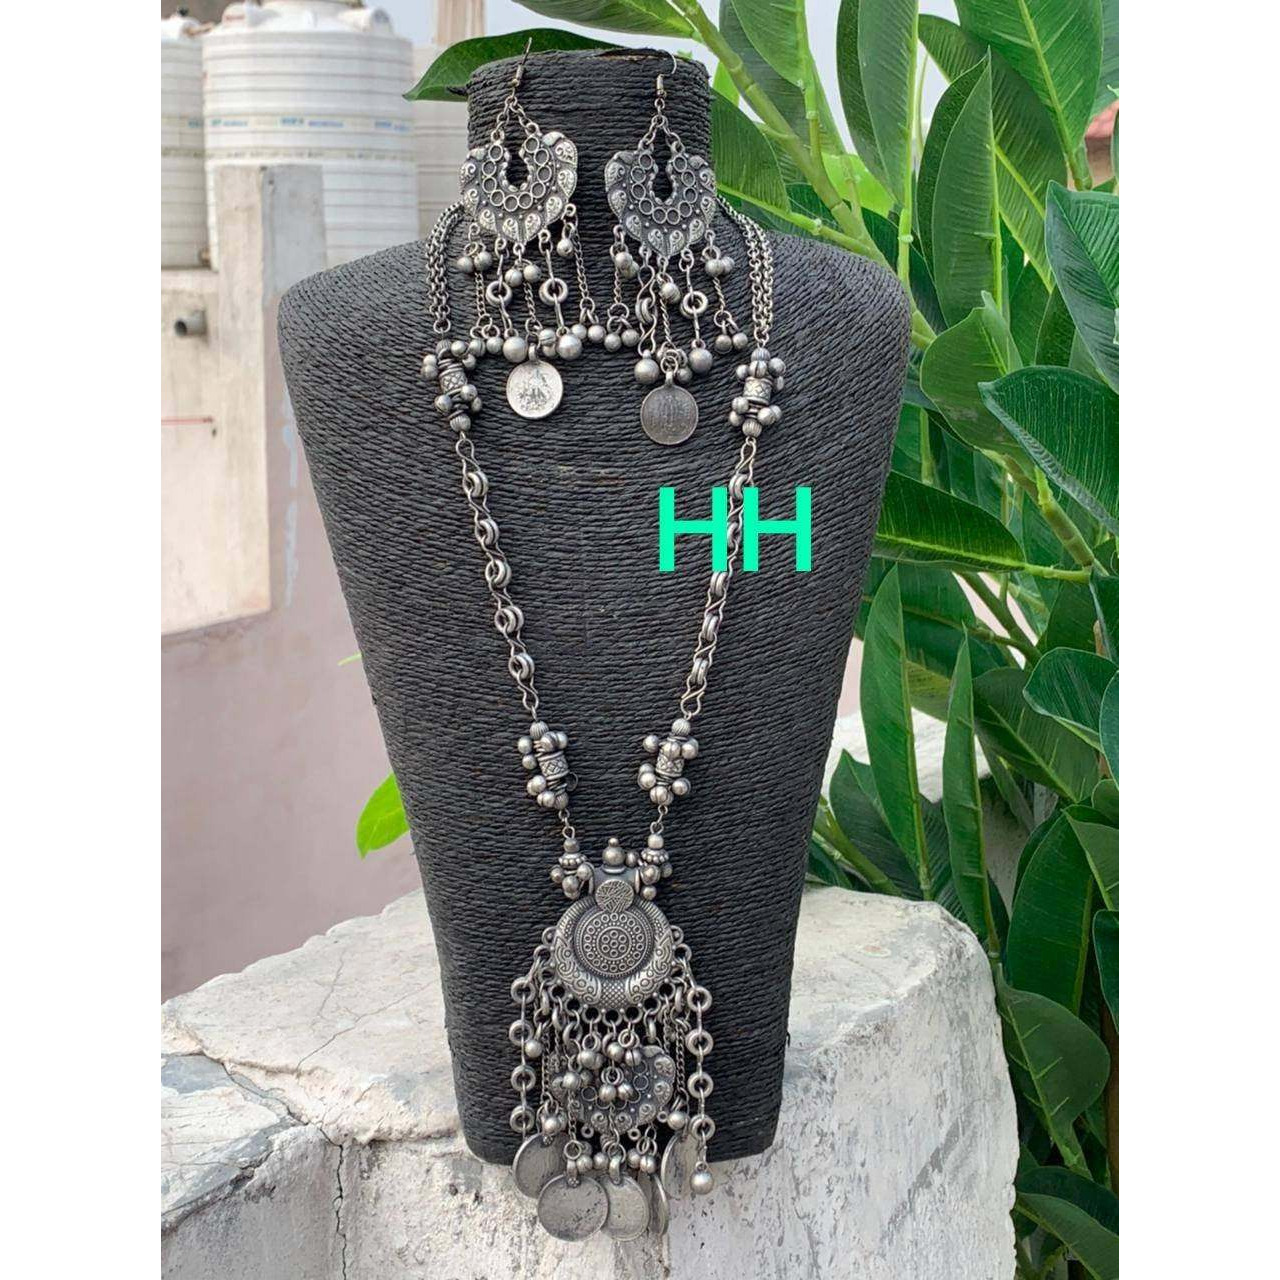 Boho jewellery, Afghani antique necklace set, Tribal necklace, silver black jewelry, long necklace set, Indian jewellery,gifts for her